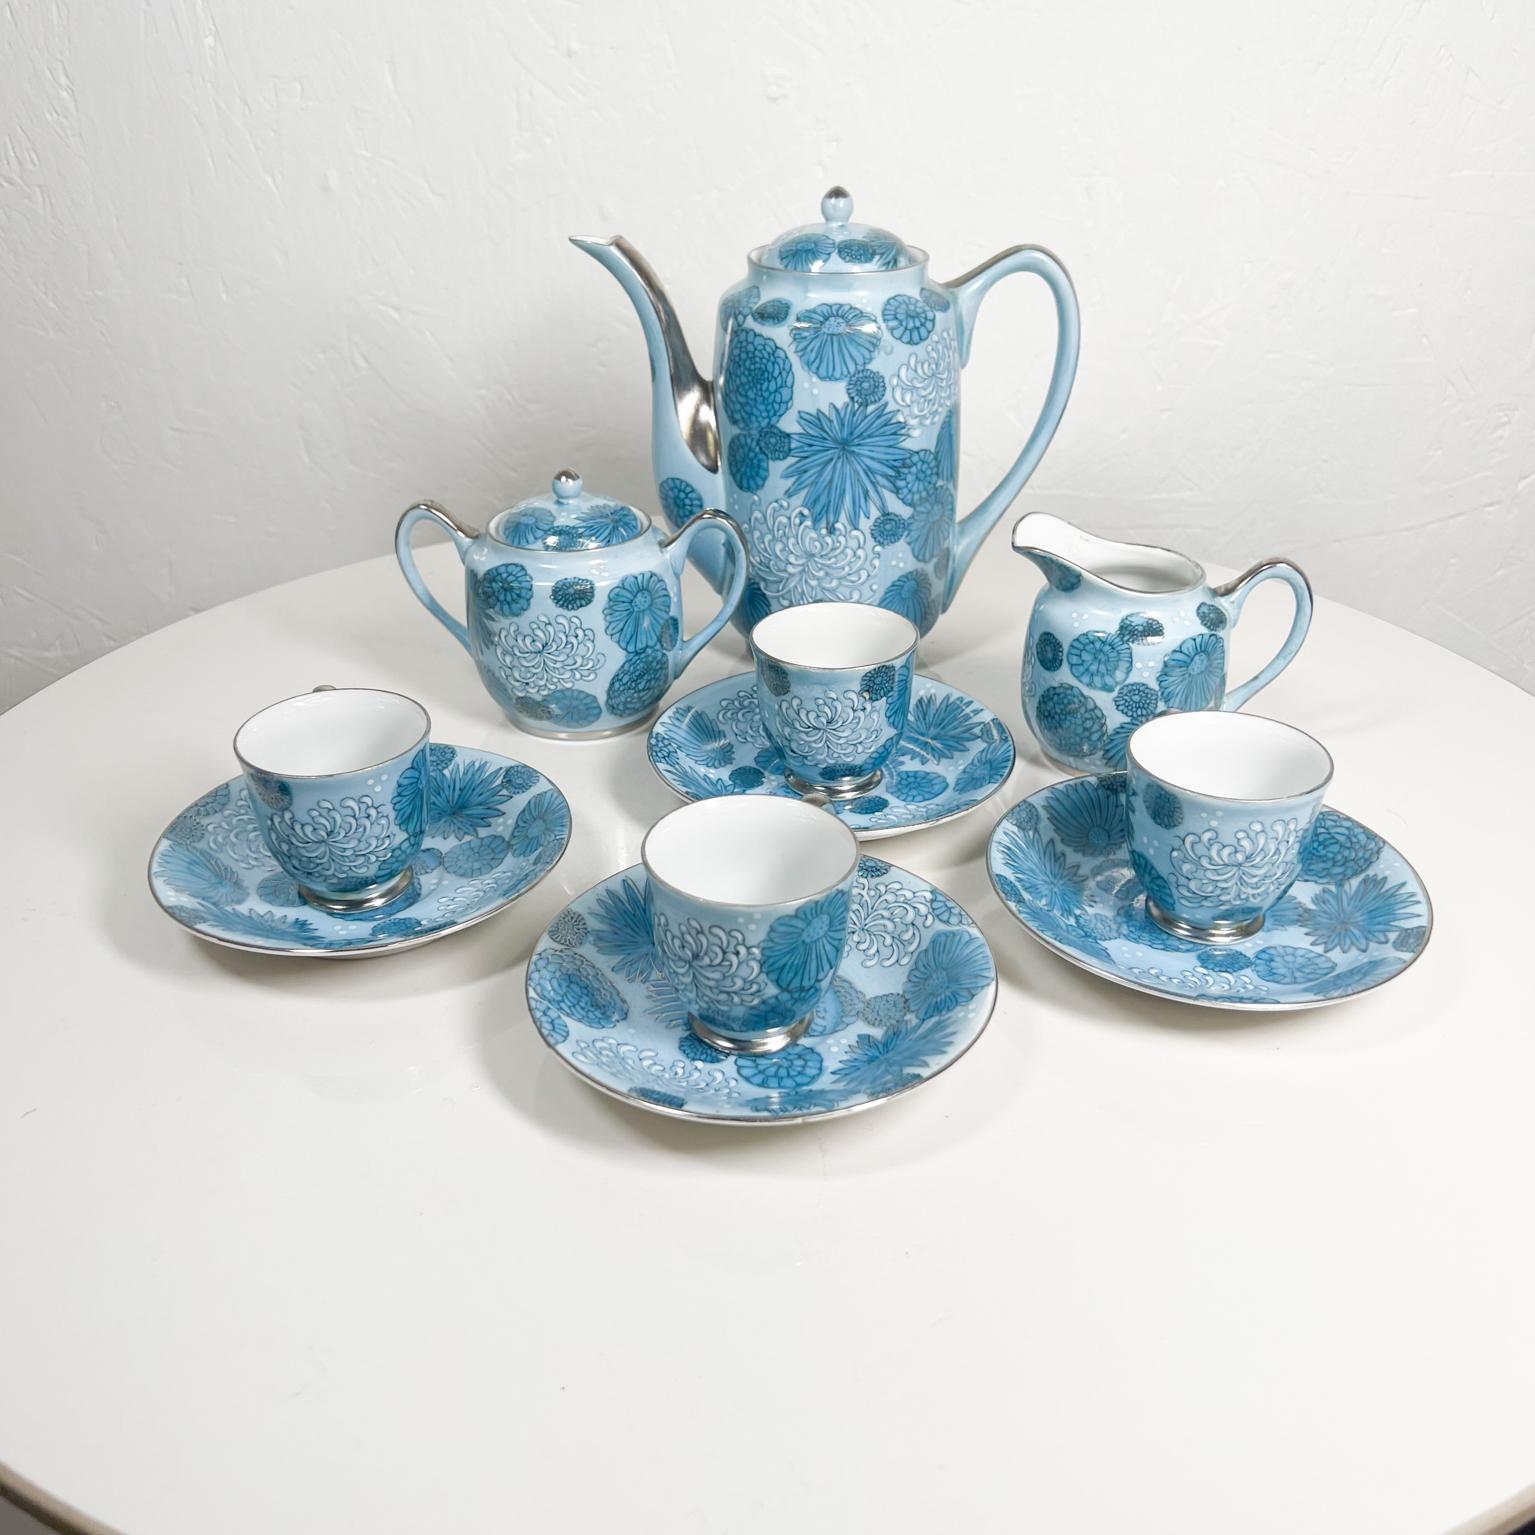 From Japan 11-piece set
Mid 20th Century Sculptural Blue Porcelain Tea Service Set for Four Japan
Teapot, Creamer and Sugar Bowl
With four cups and saucers
Tea pot 7.25 x 3.38 w x 7 h 
Sugar 5 x 3 x 3.5 h 
Creamer 4 d x 2. 63 2.25 h 
Saucer plate